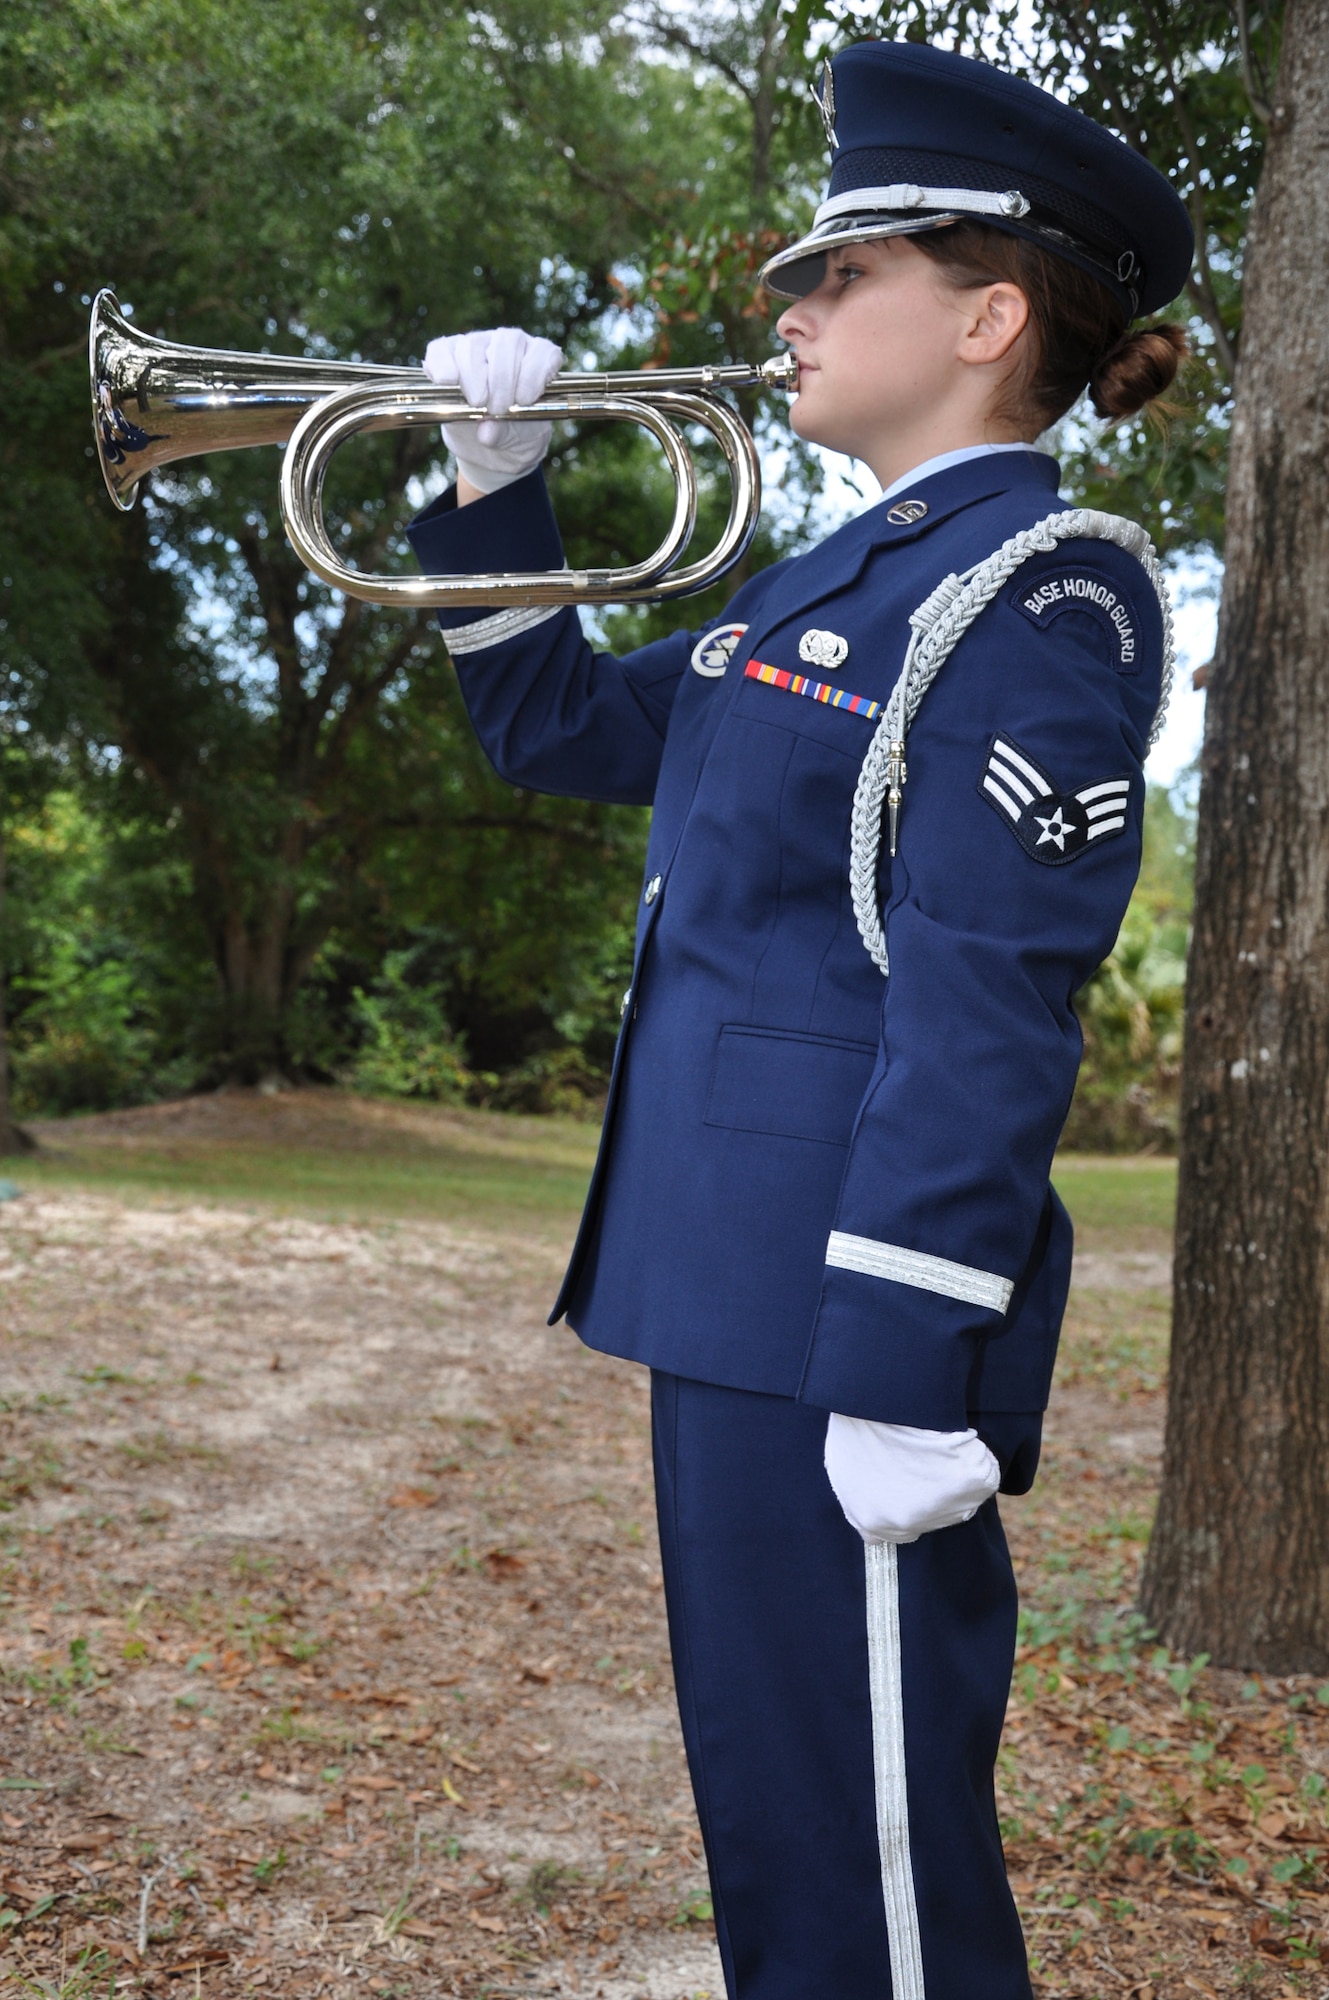 EGLIN AIR FORCE BASE, Fla. -- Senior Airman Jaclyn Laws, an Eglin Honor Guard member from the 96th Logistics Readiness Squadron, plays "Taps" during ceremoy practice. (U.S. Air Force photo by Airman 1st Class Anthony Jennings)